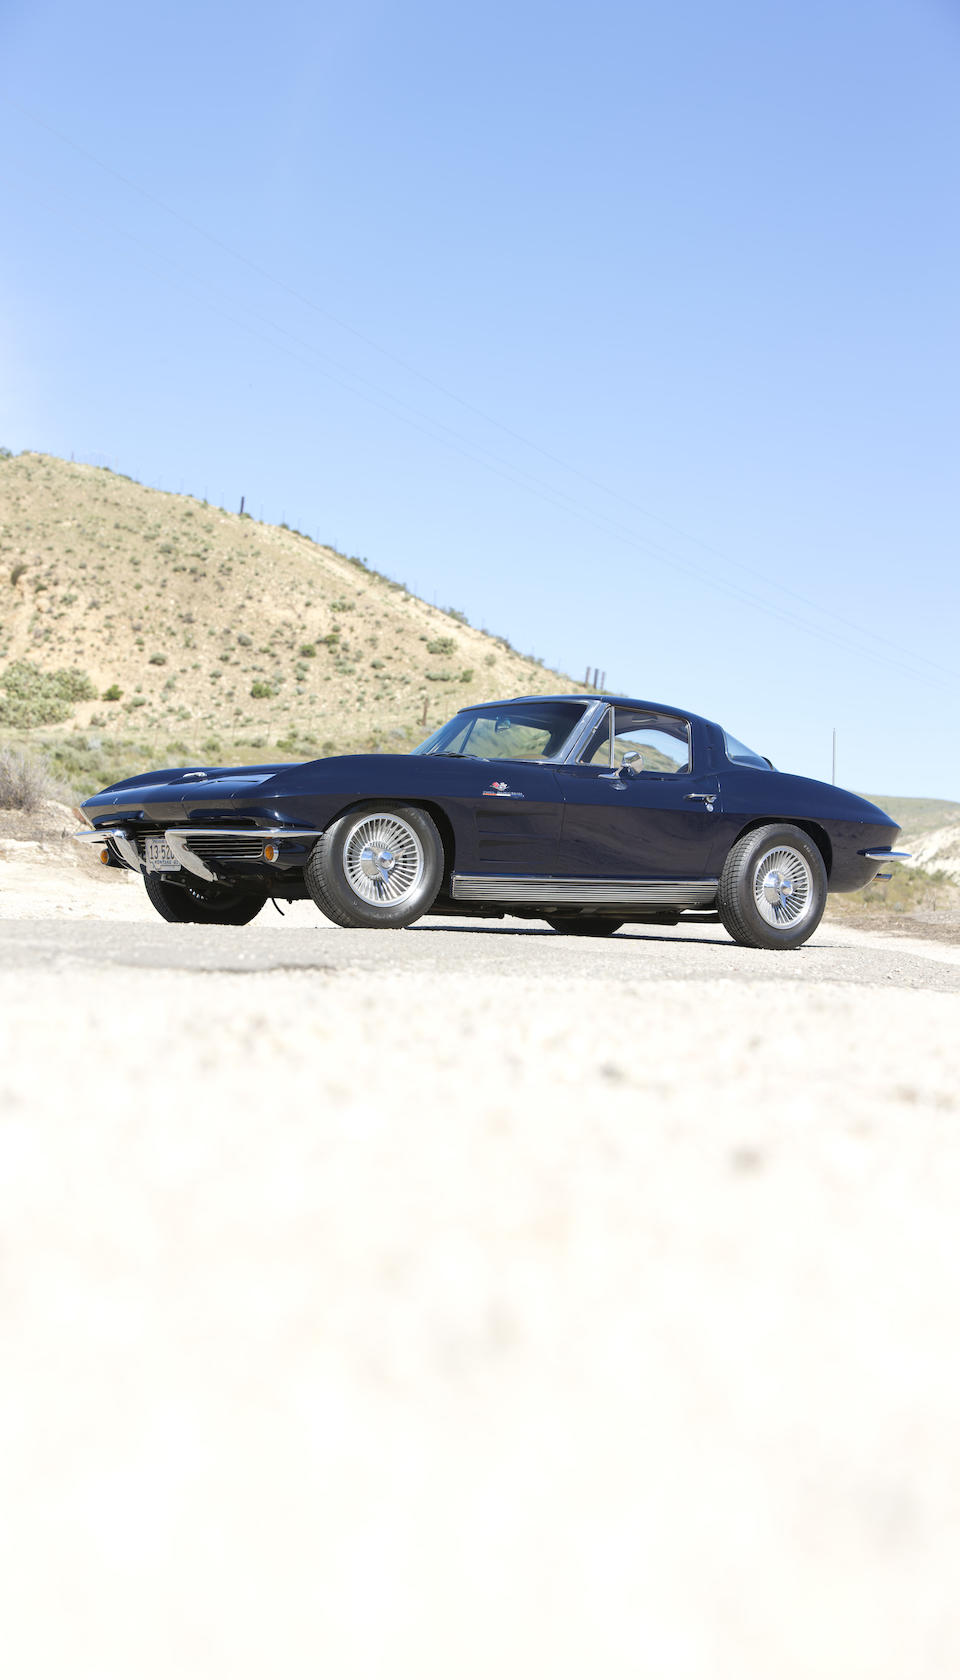 Offered from the Tony Hart Collection     ,1963 CHEVROLET CORVETTE 327/360HP COUPE  Chassis no. 30837S105479 Engine no. 3105479 F11126RF